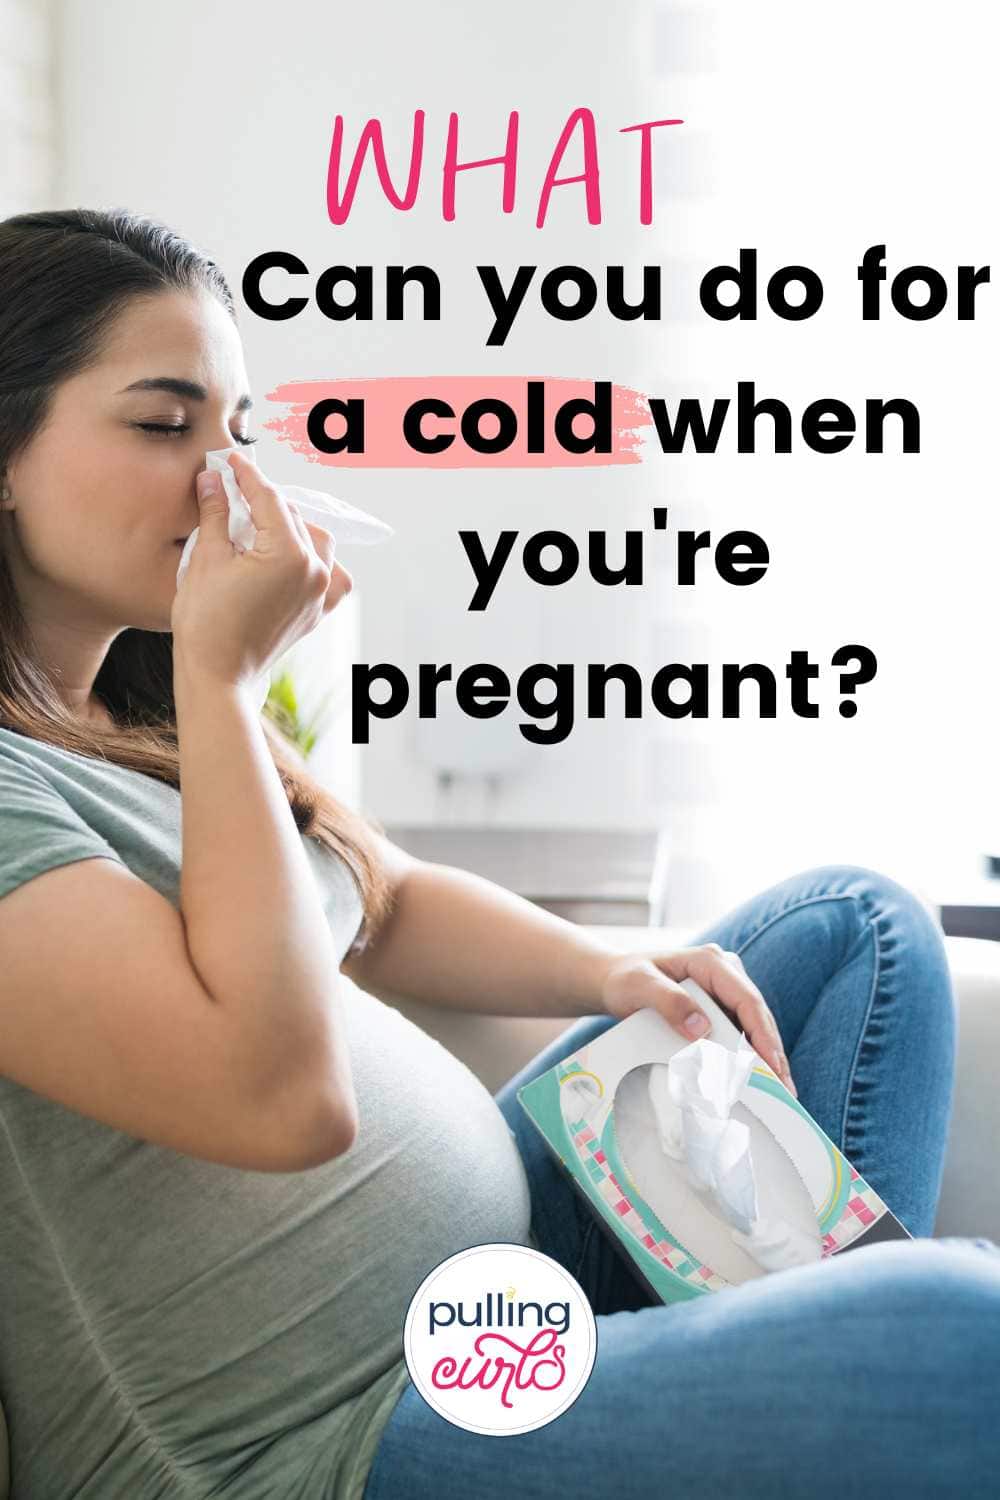 Carrying a baby is an incredible experience, but it can also come with unwanted colds and flu-like symptoms! Don’t worry, we’ve got you covered. Here’s what you need to know about colds during pregnancy and how to manage them in a safe way. #Pregnancy #Colds #Healthcare #MomsToBe via @pullingcurls